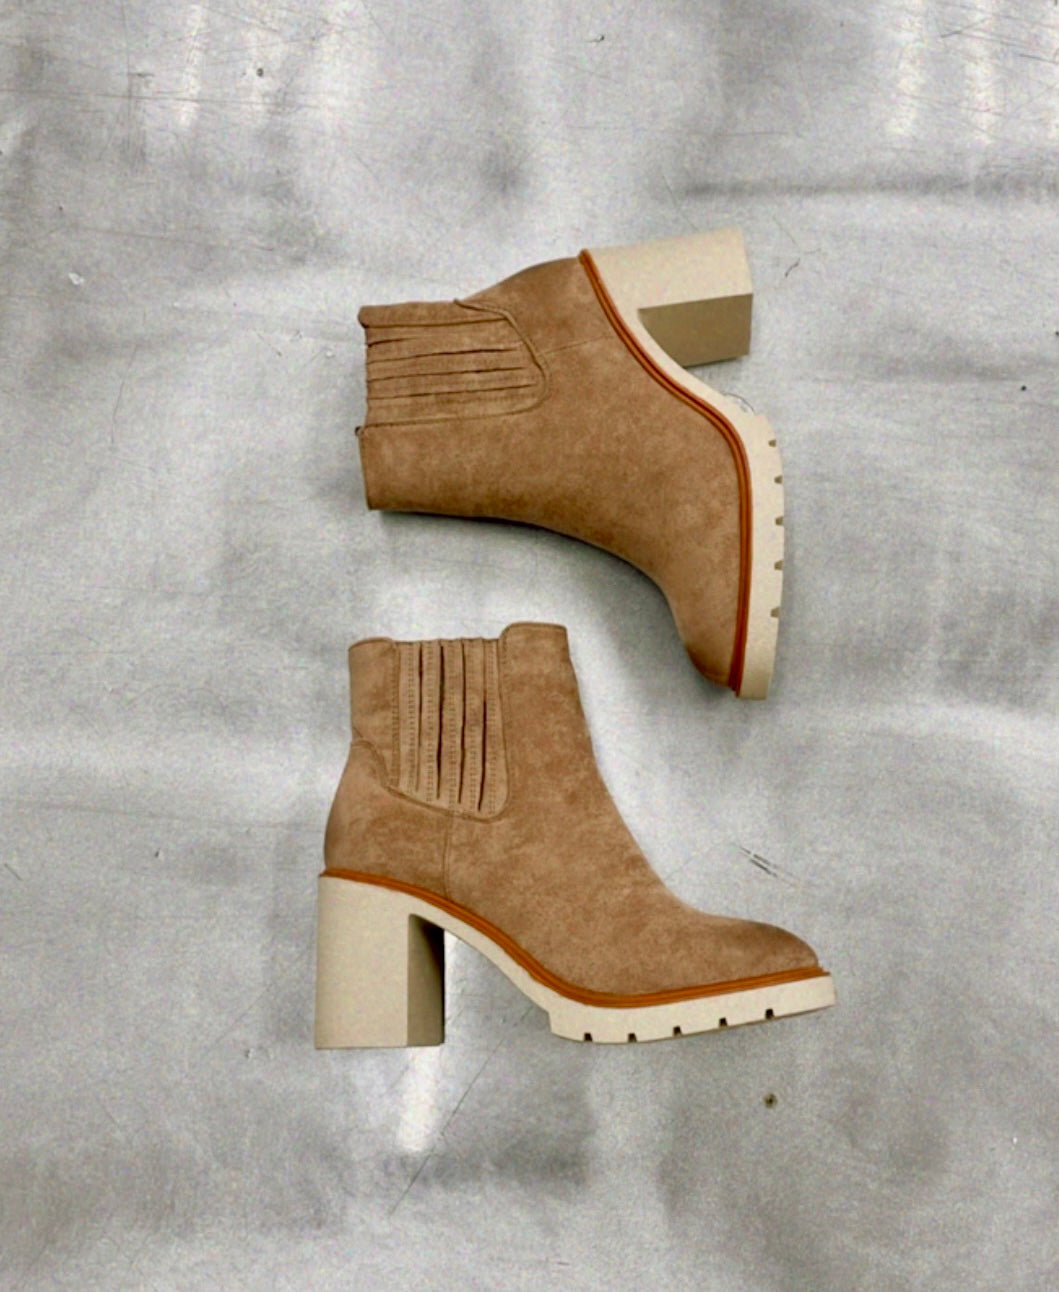 Chelsea Boots (Taupe)